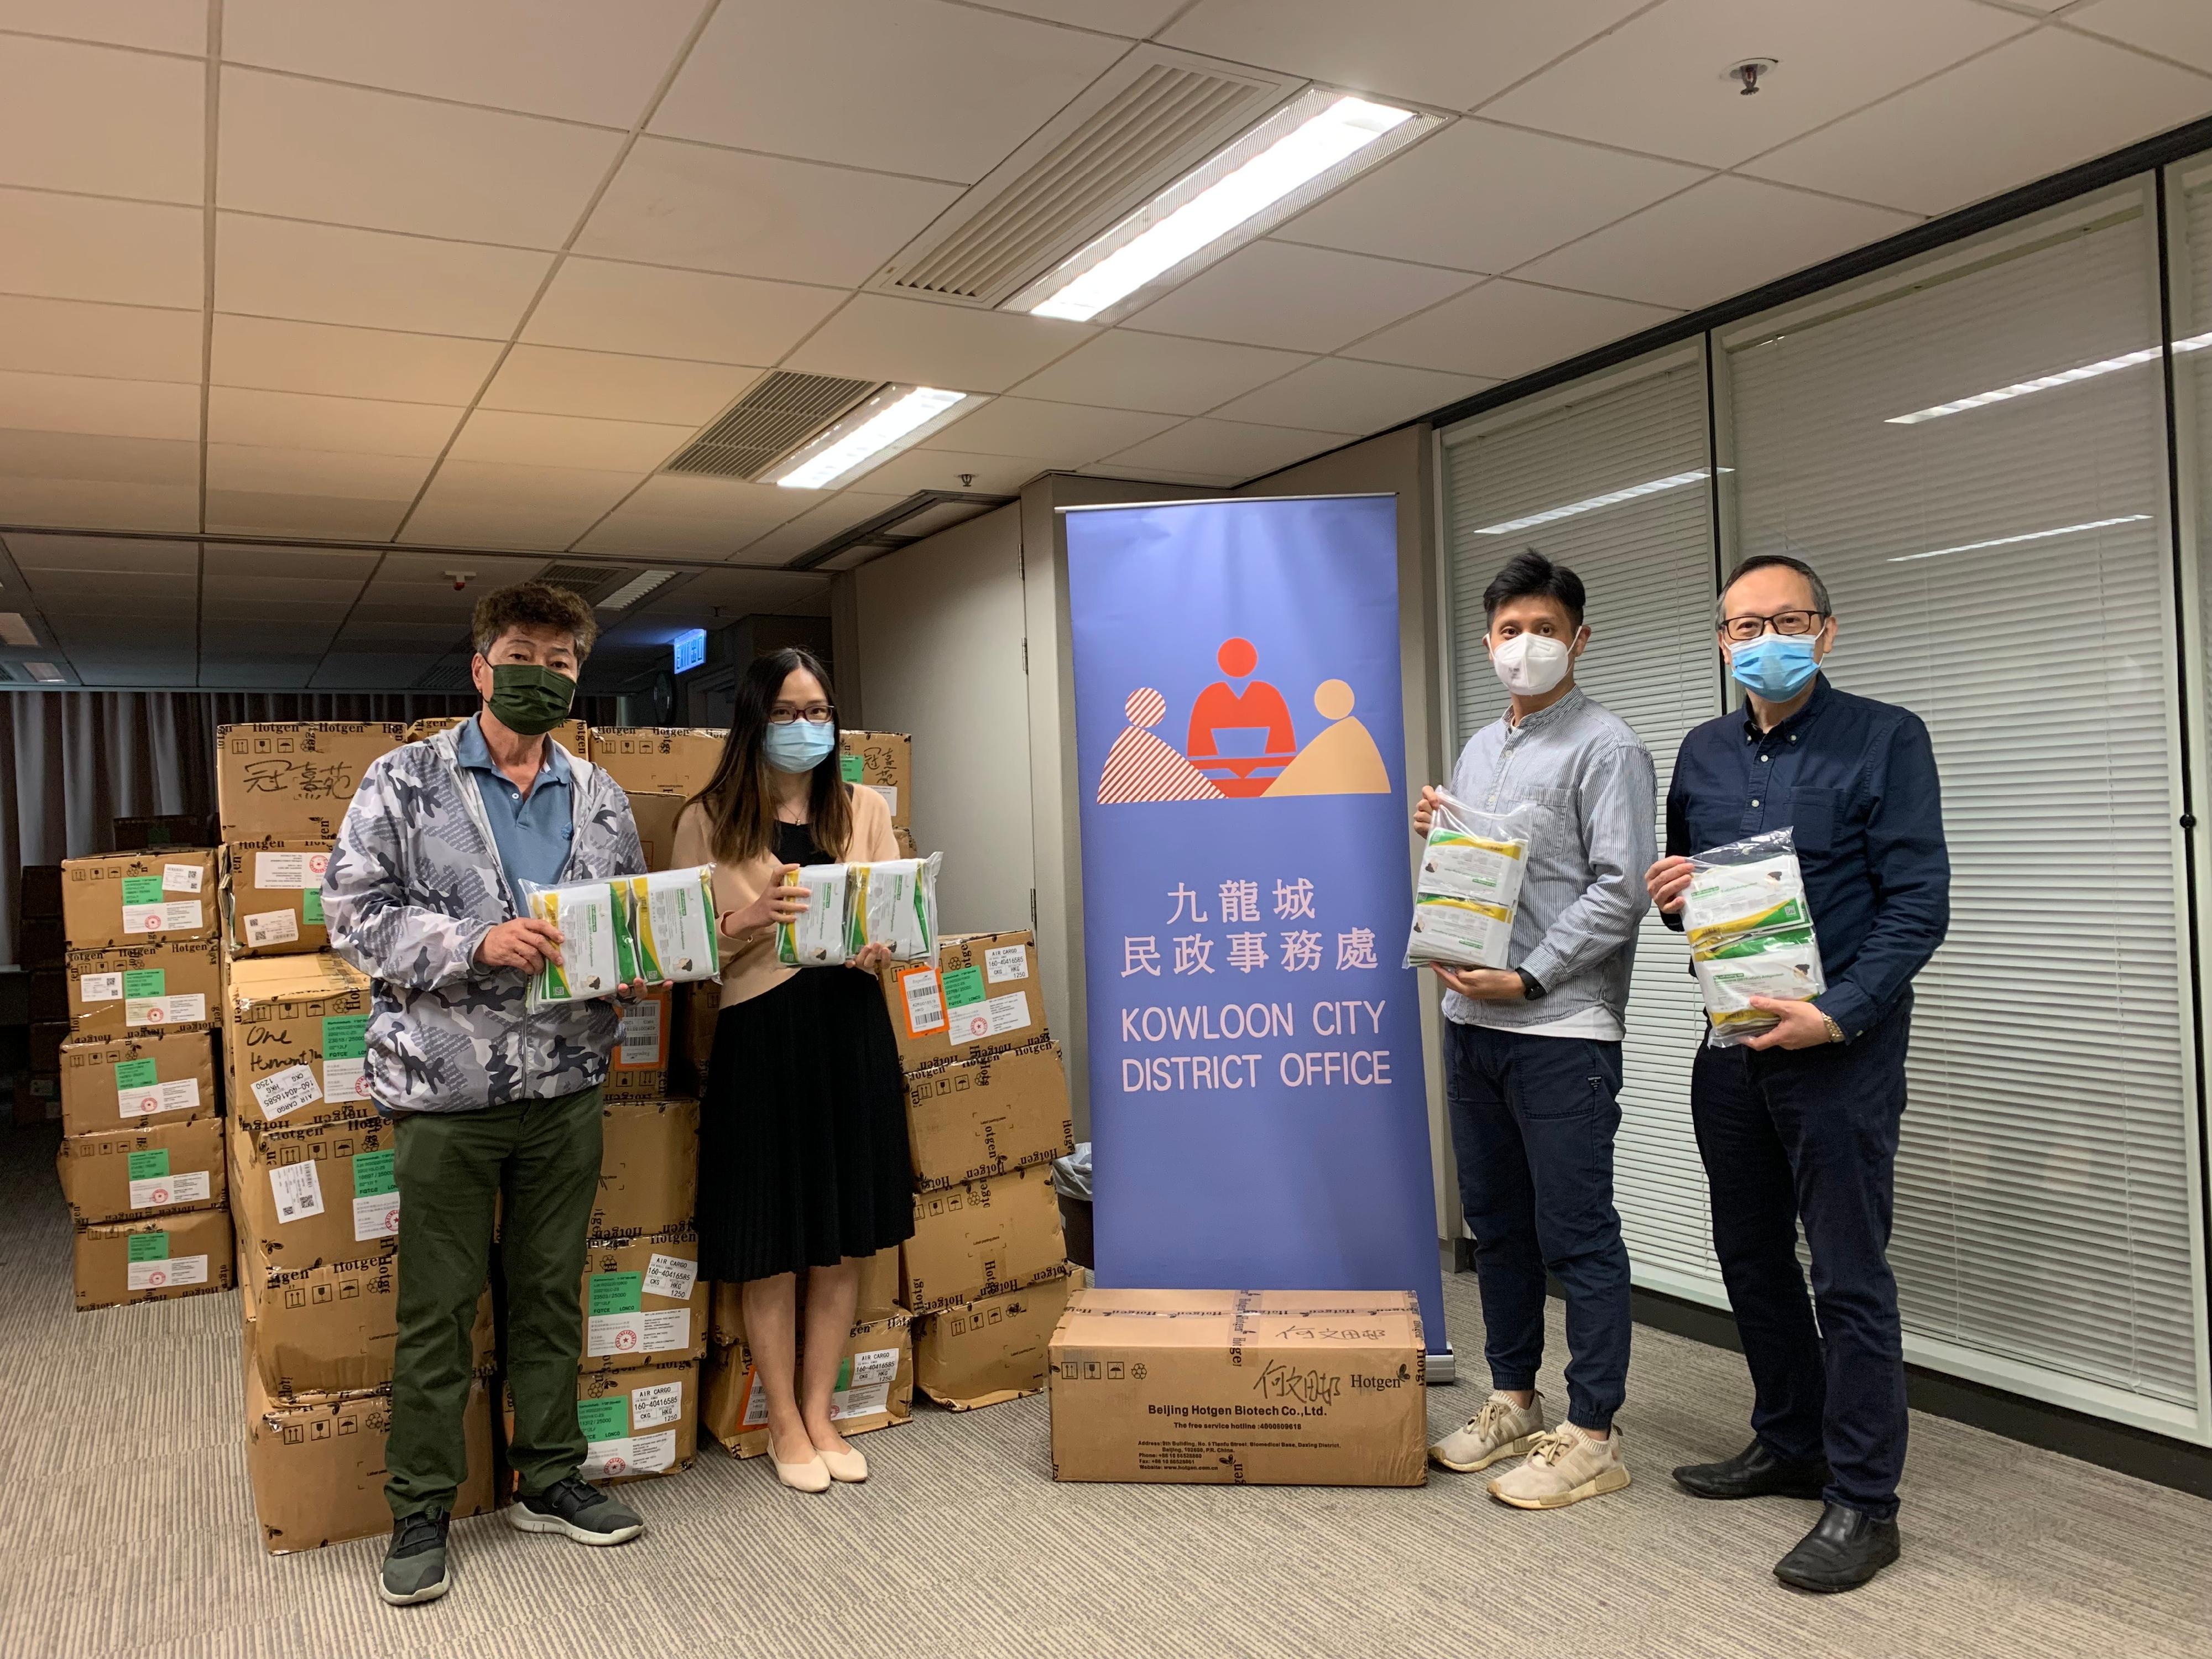 The Kowloon City District Office today (April 19) distributed COVID-19 rapid test kits to households, cleansing workers and property management staff living and working in Ho Man Tin Estate for voluntary testing through the property management company.